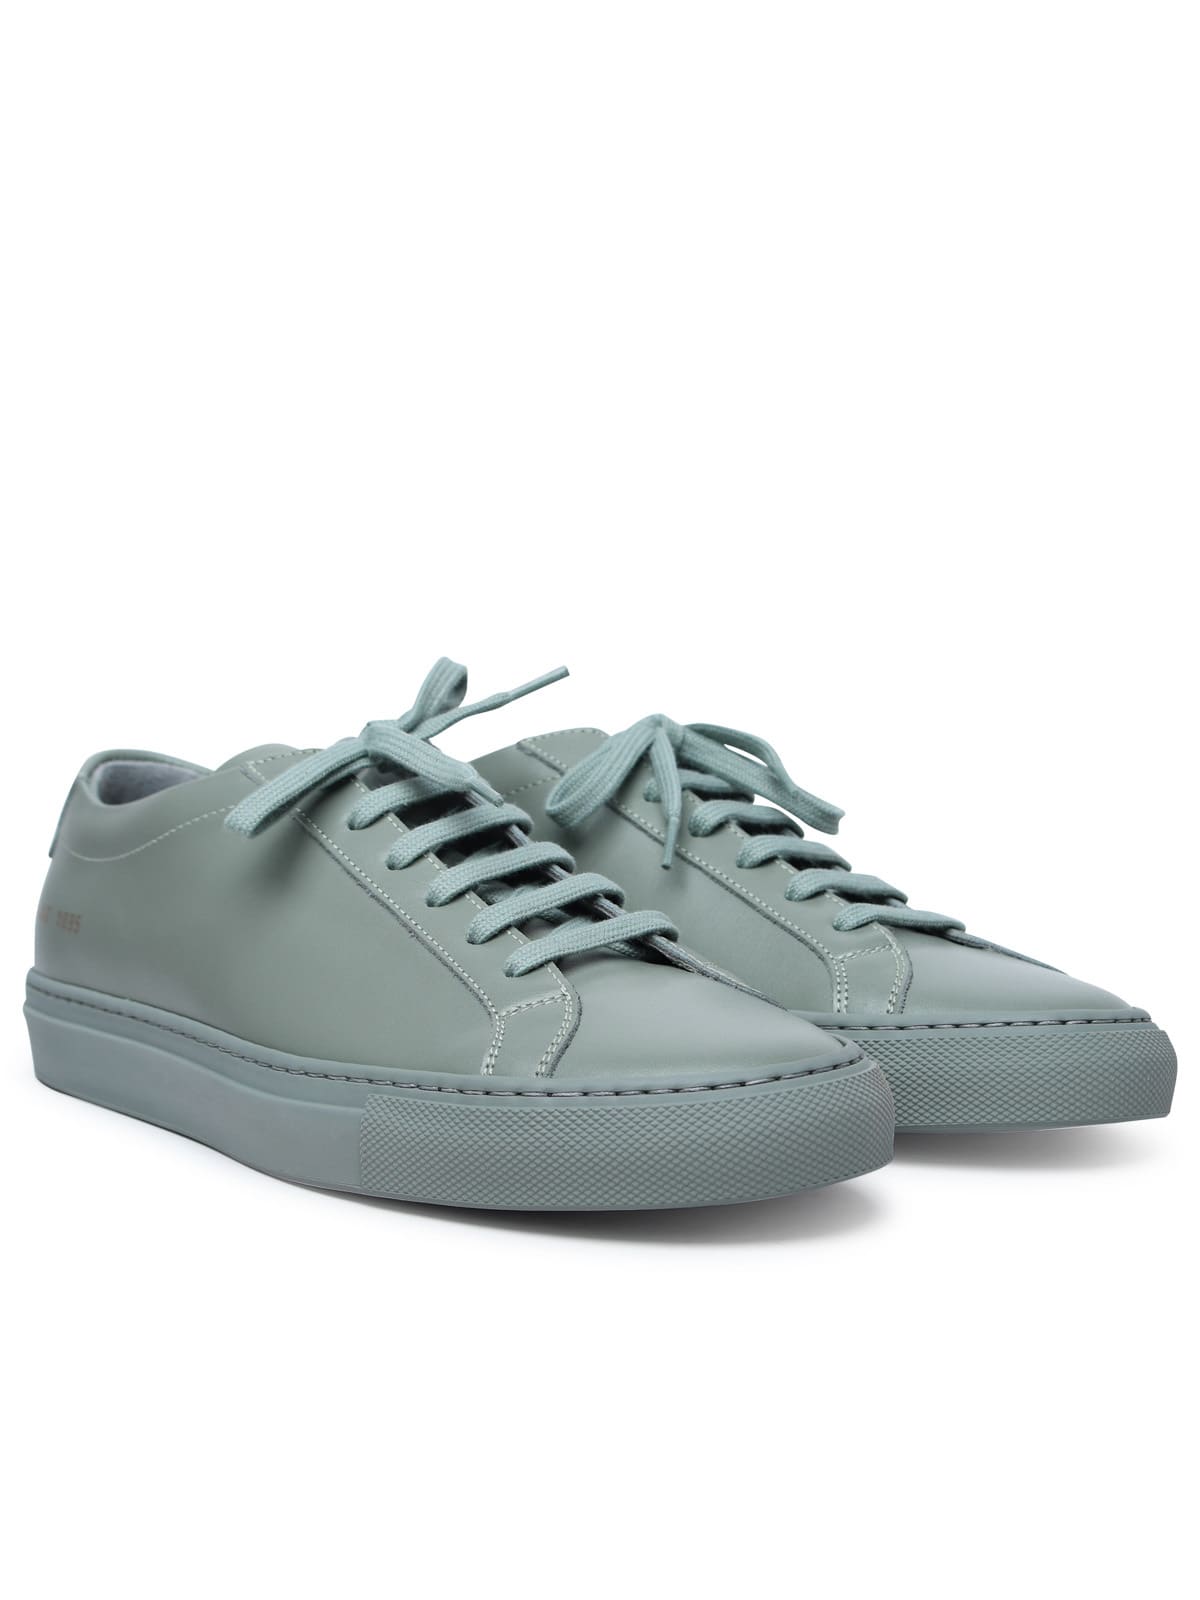 Shop Common Projects Original Achilles Vintage Green Leather Sneakers